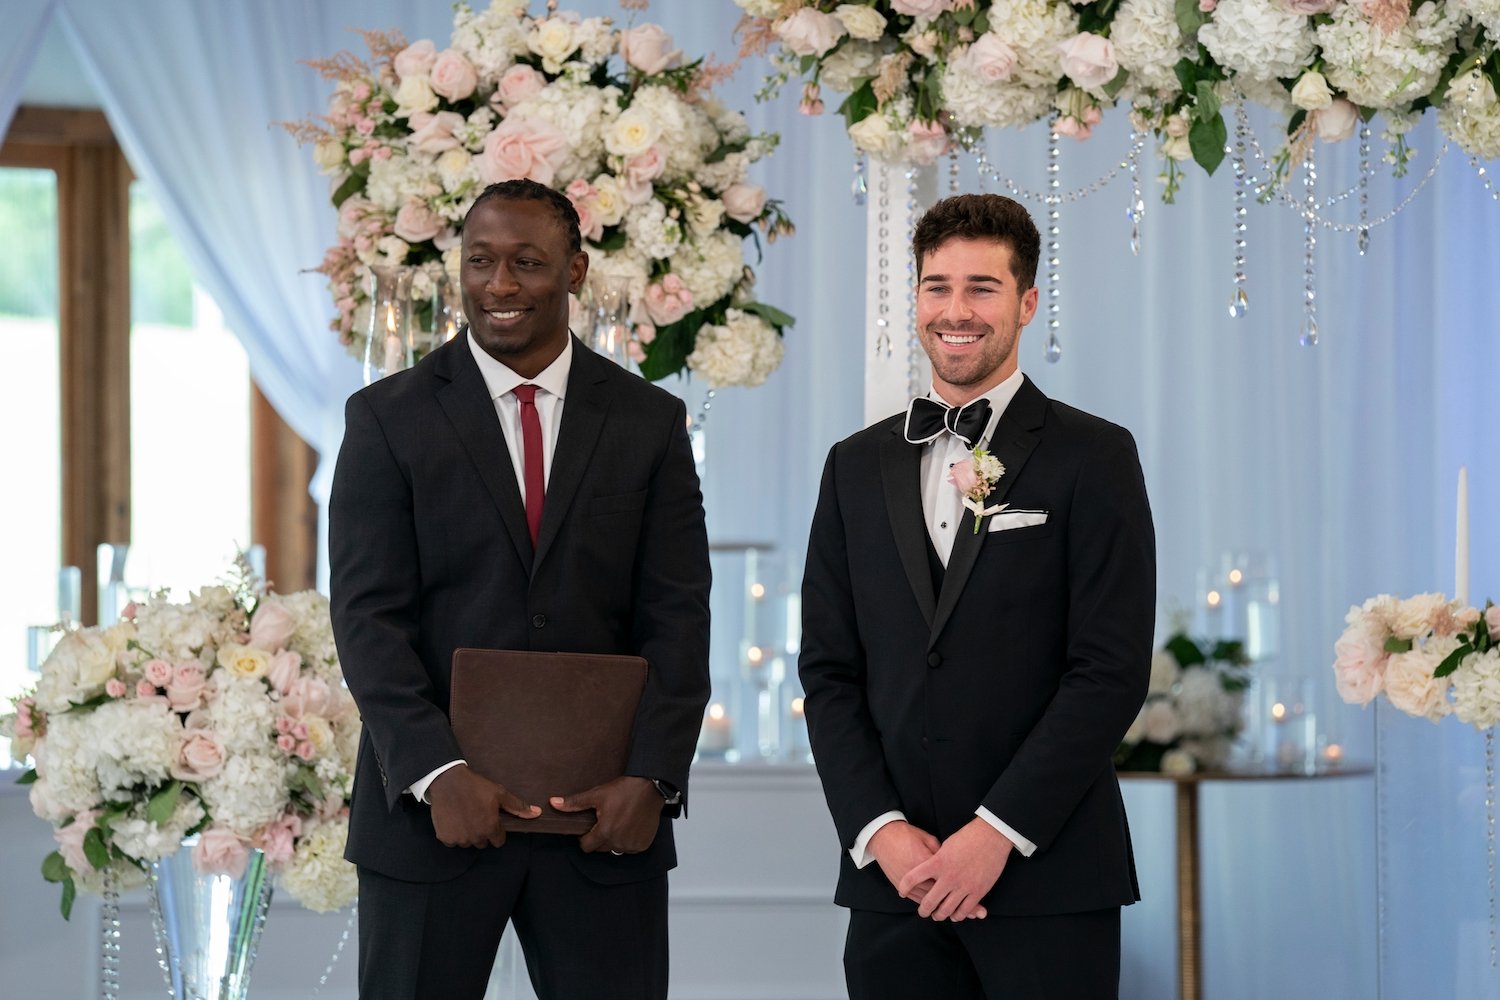 'Love Is Blind' cast member Cole Barnett stands with the officiant wearing a tuxedo on his wedding day.